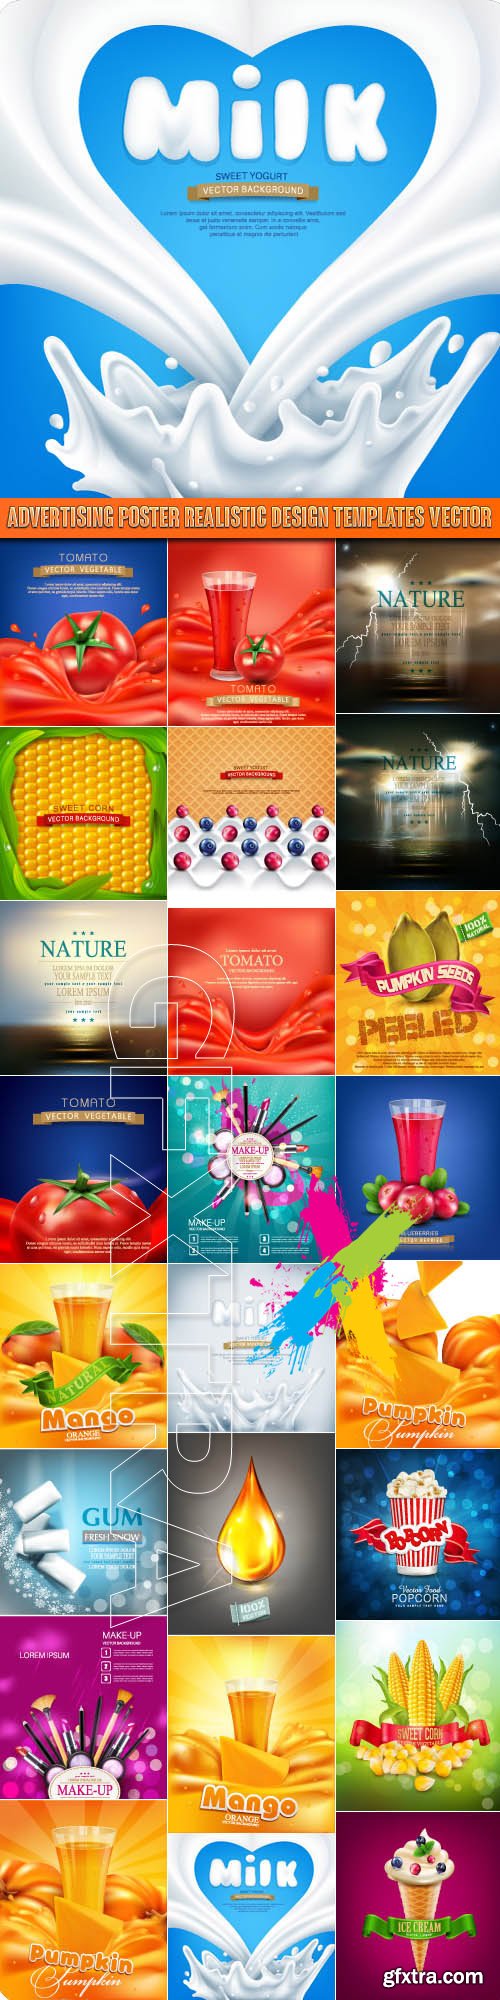 Advertising poster realistic design templates vector